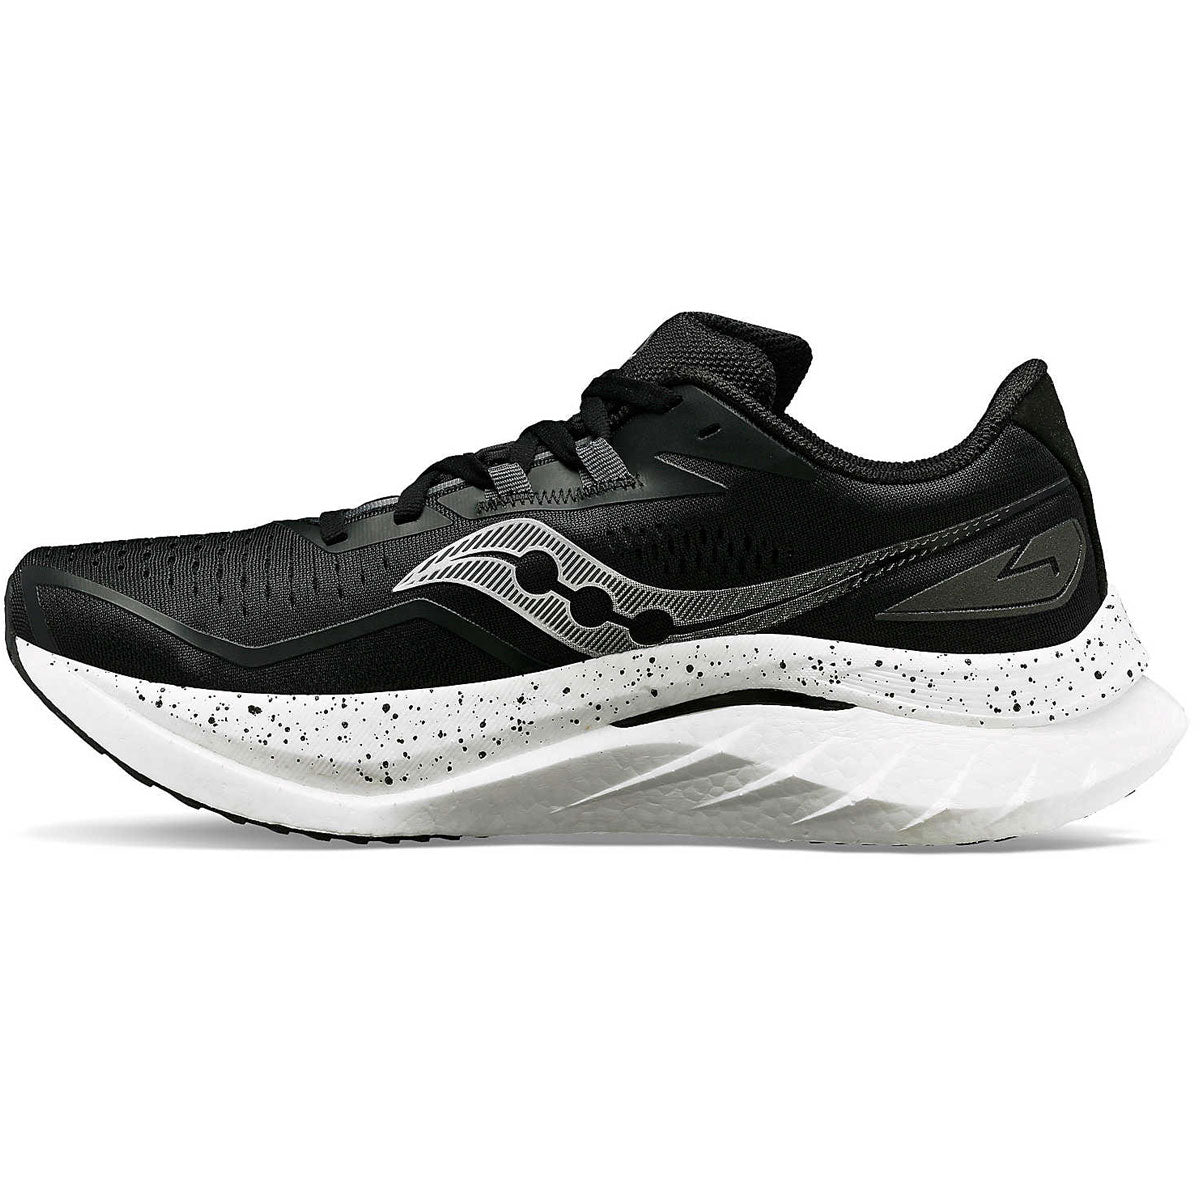 Saucony Endorphin Speed 4 Running Shoes - Mens - Black